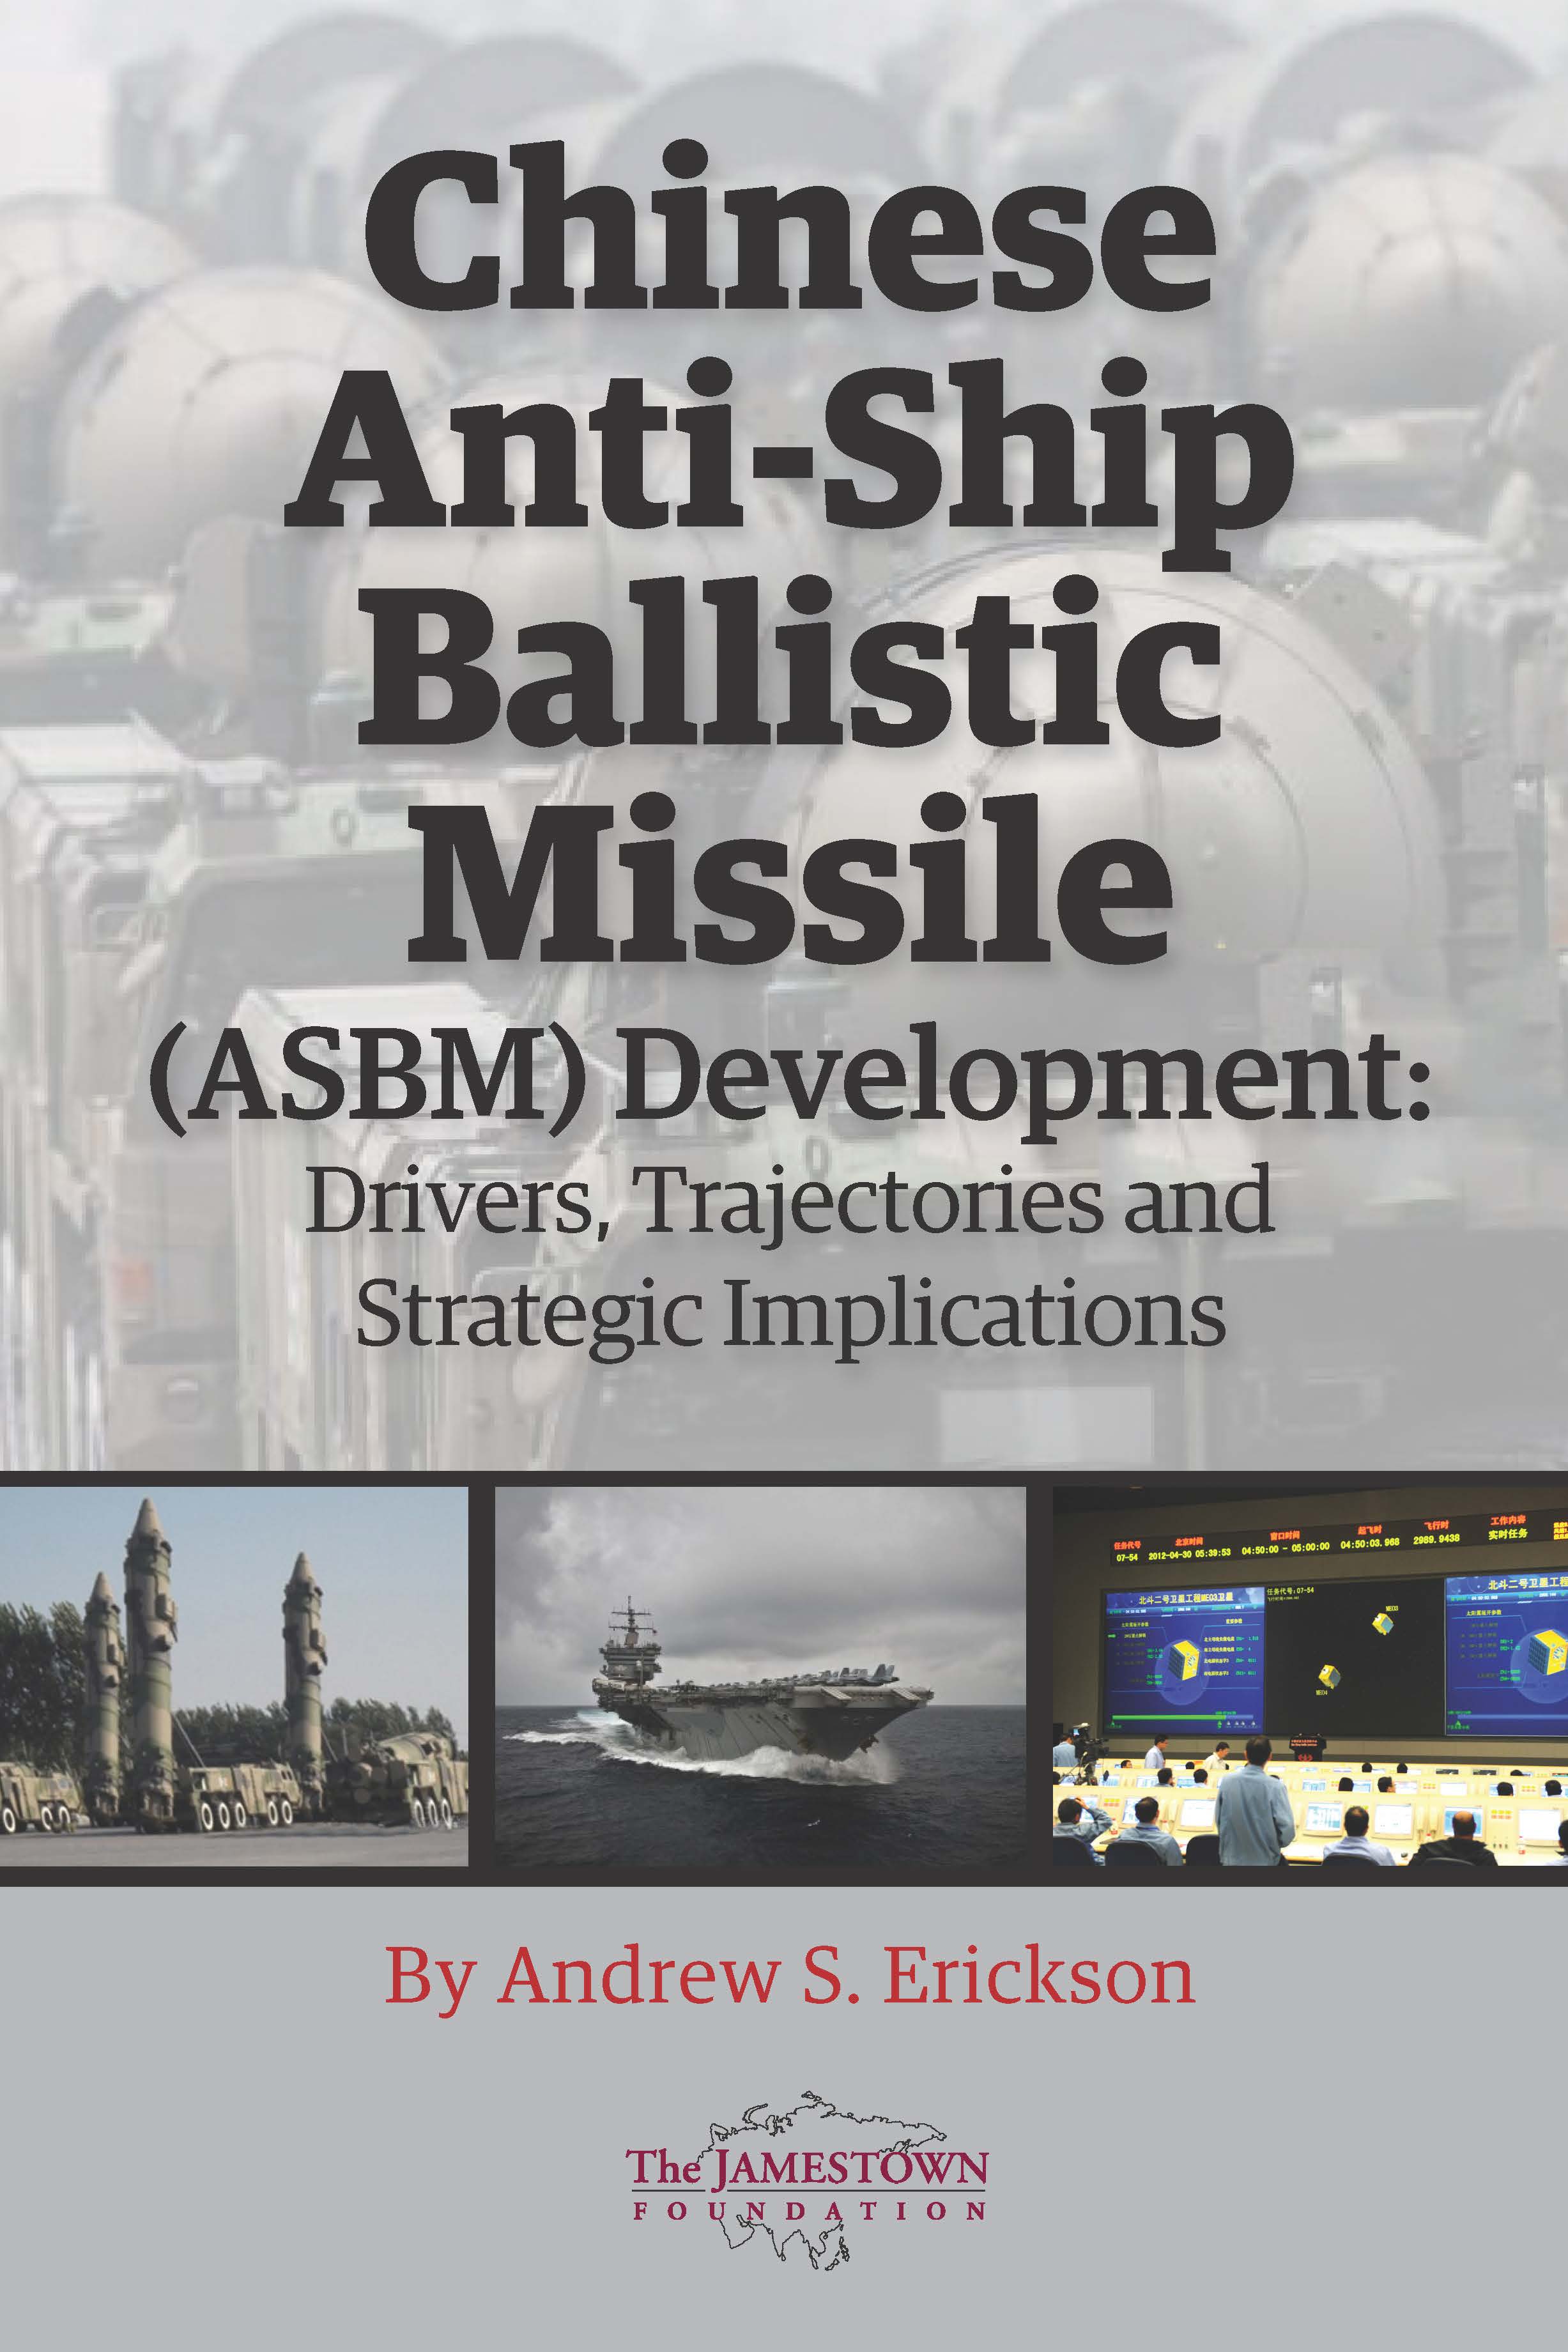 Chinese Anti-Ship Ballistic Missile (ASBM) Development_Drivers, Trajectories and Strategic Implications